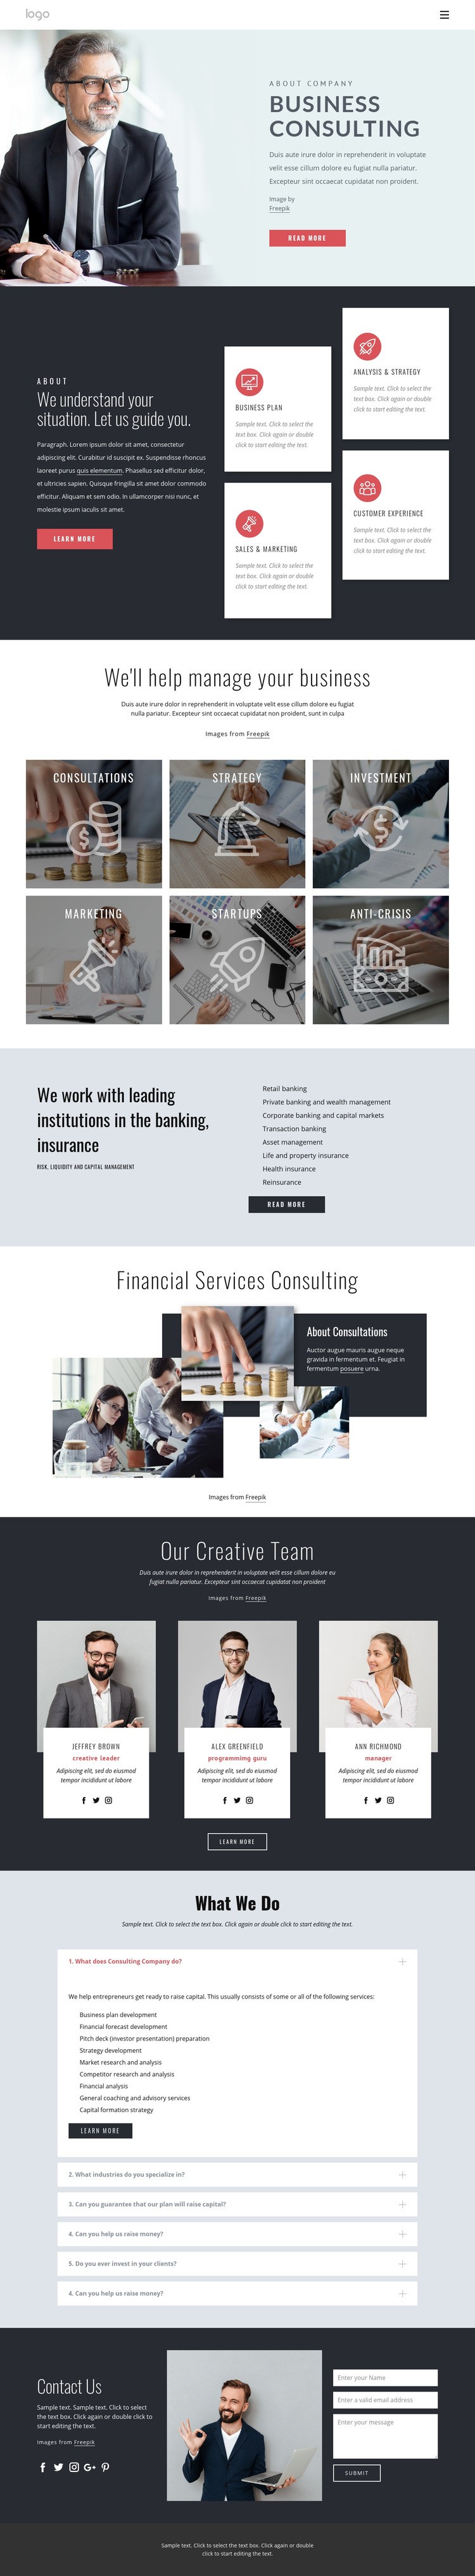 Successful financial strategy Html Code Example